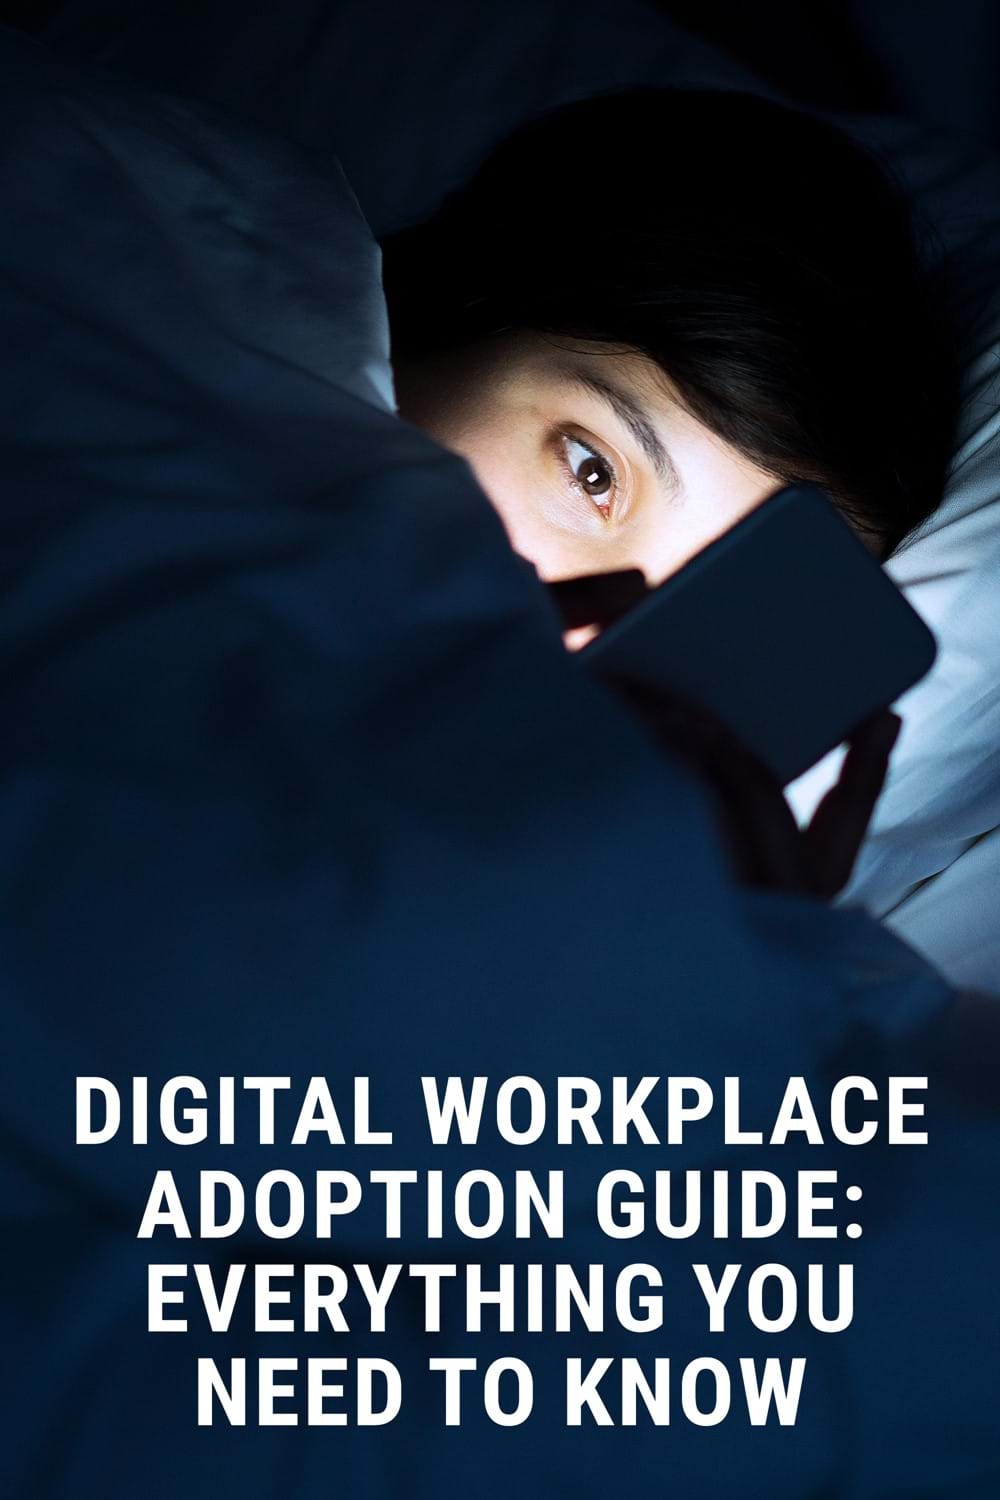 Digital workplace adoption guide pages